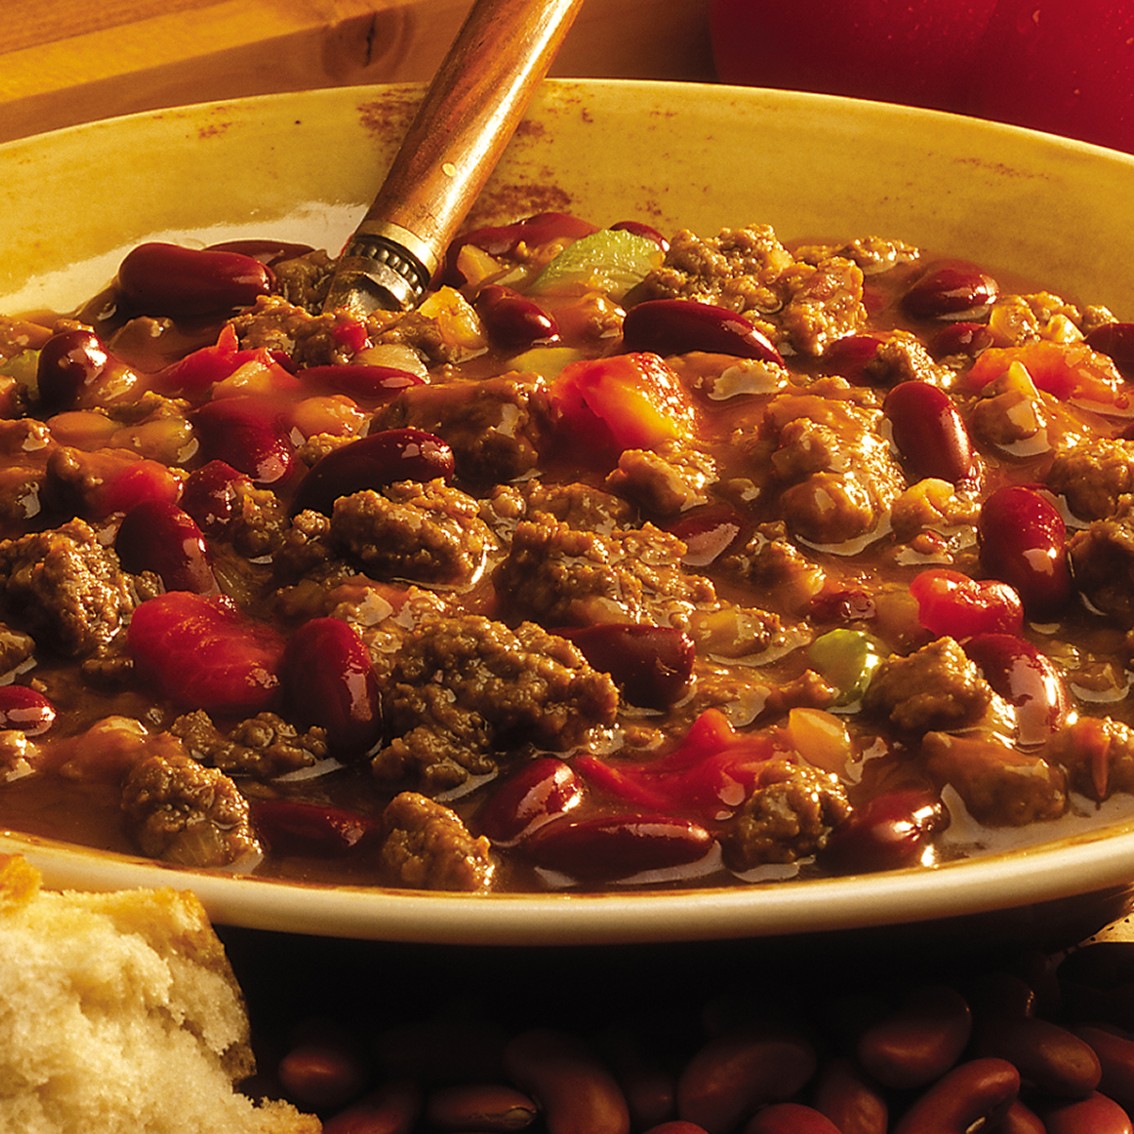 Bowl of foodservice Whitey's Frozen Chili Manufacturers Beef Chili in a restaurant setting